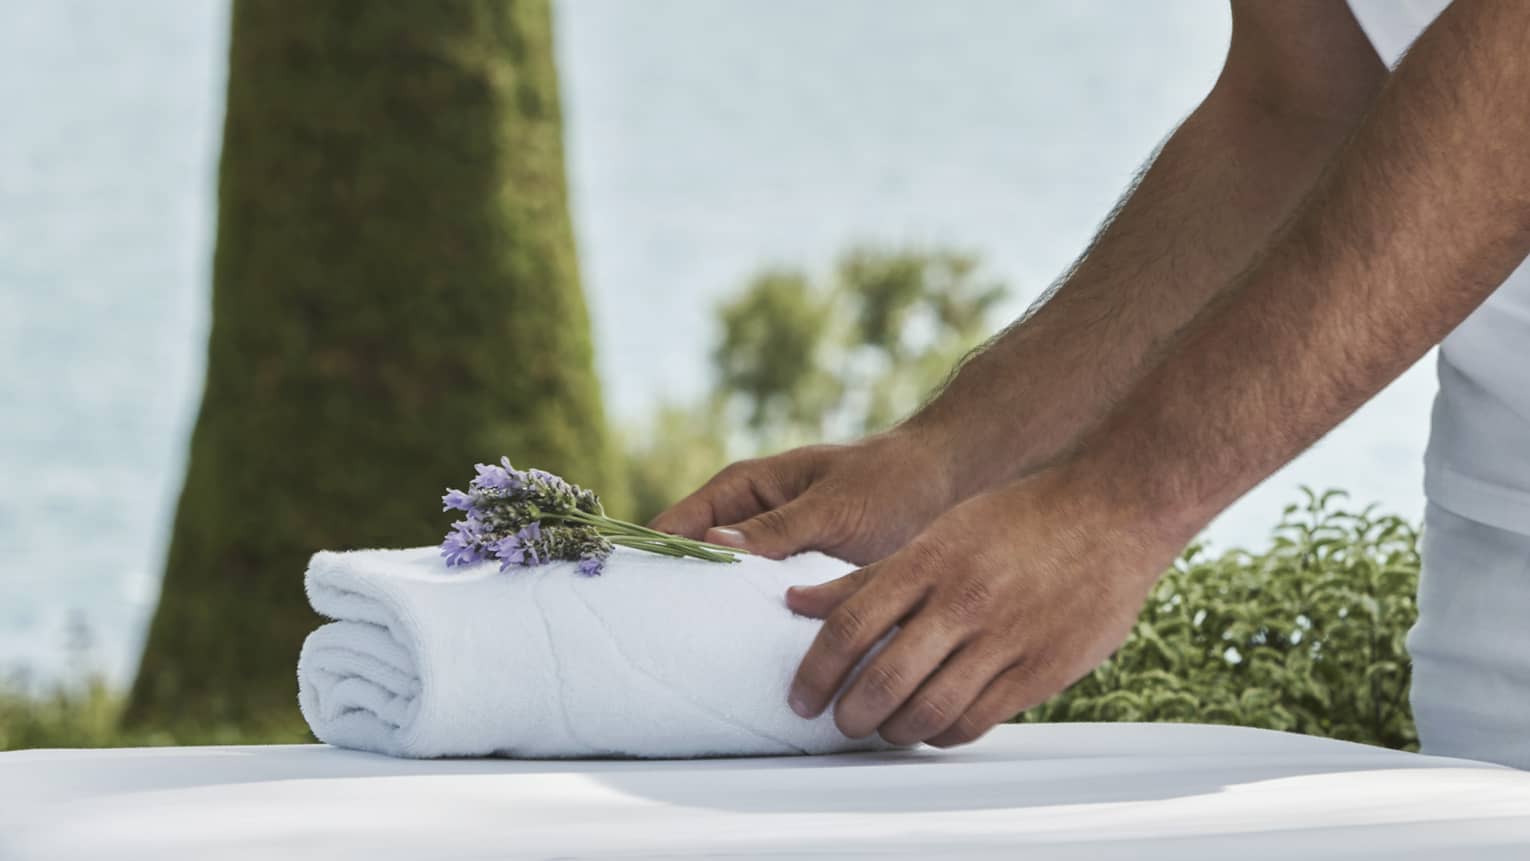 Close-up of hands setting on folded white towel with lavender sprig